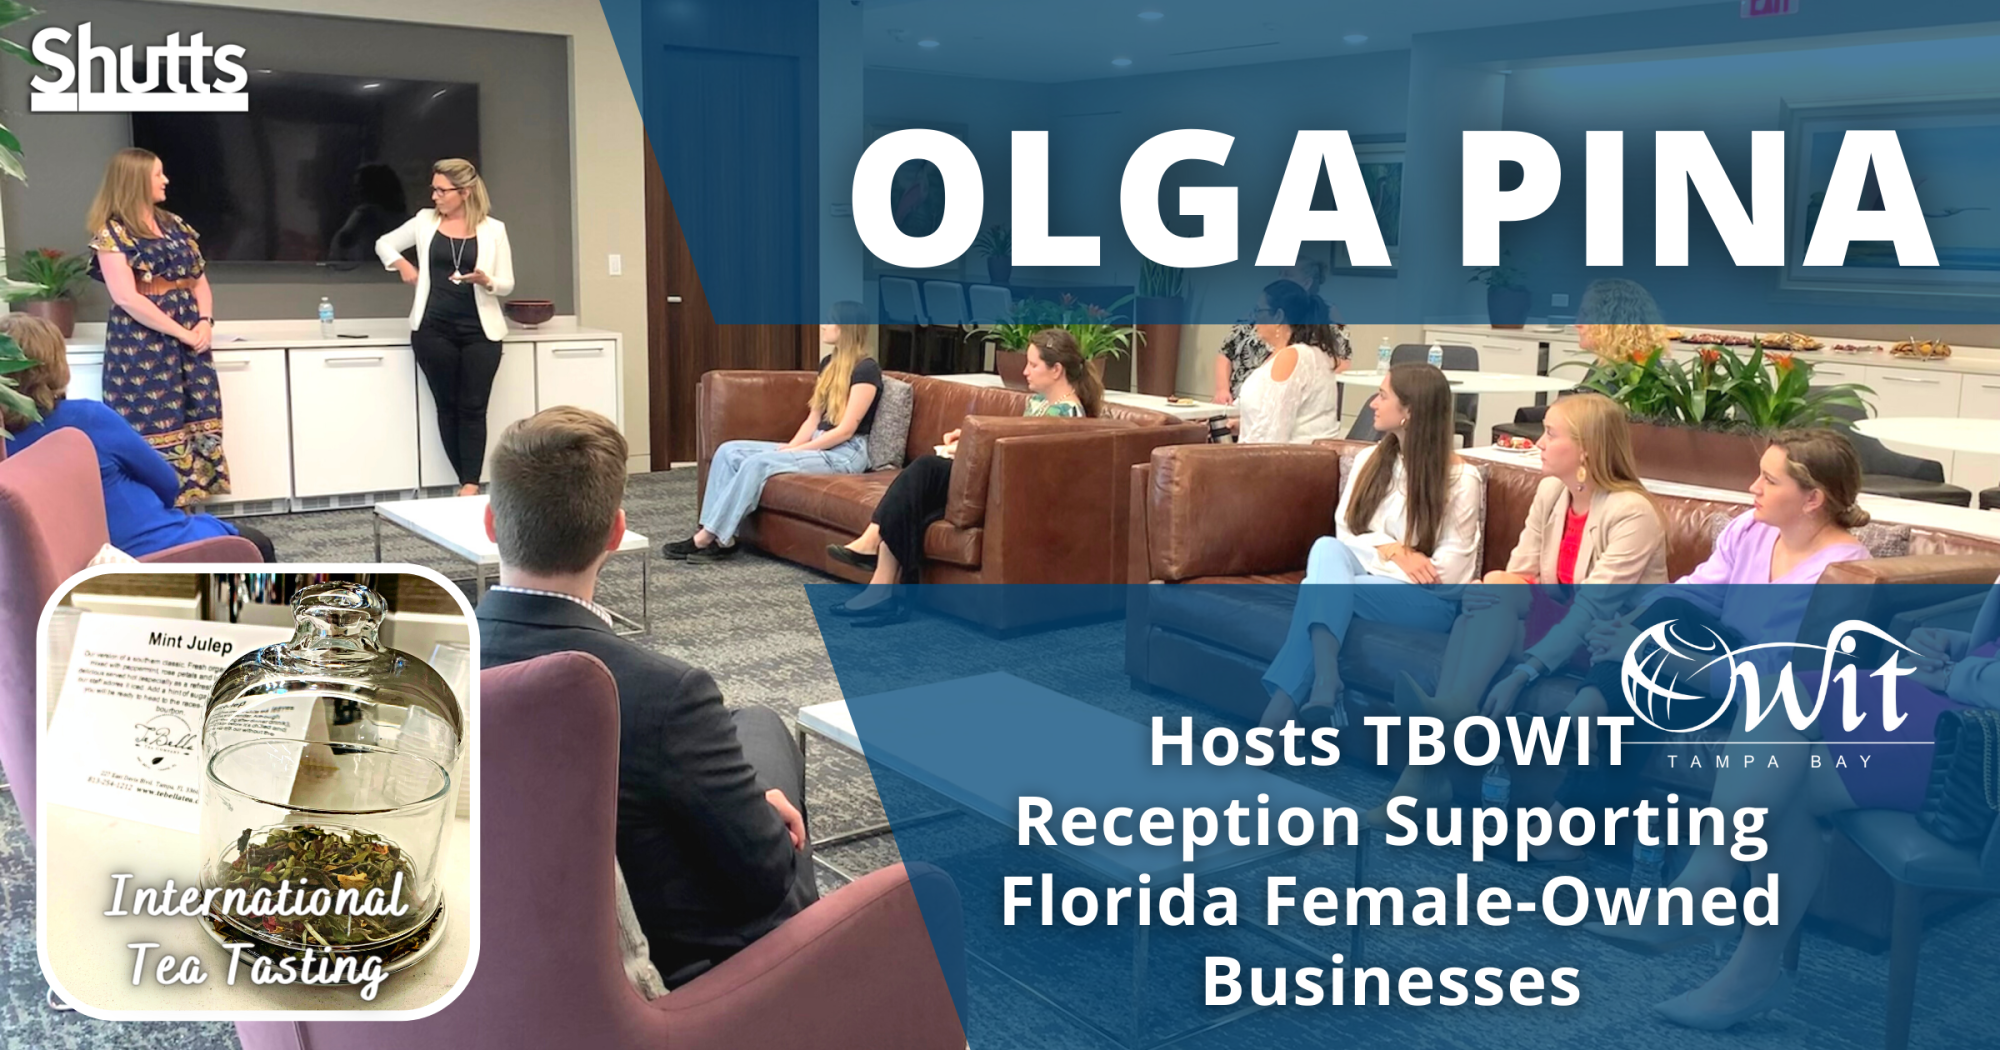 Olga Pina Hosts TBOWIT Reception Supporting Florida Female-Owned Businesses